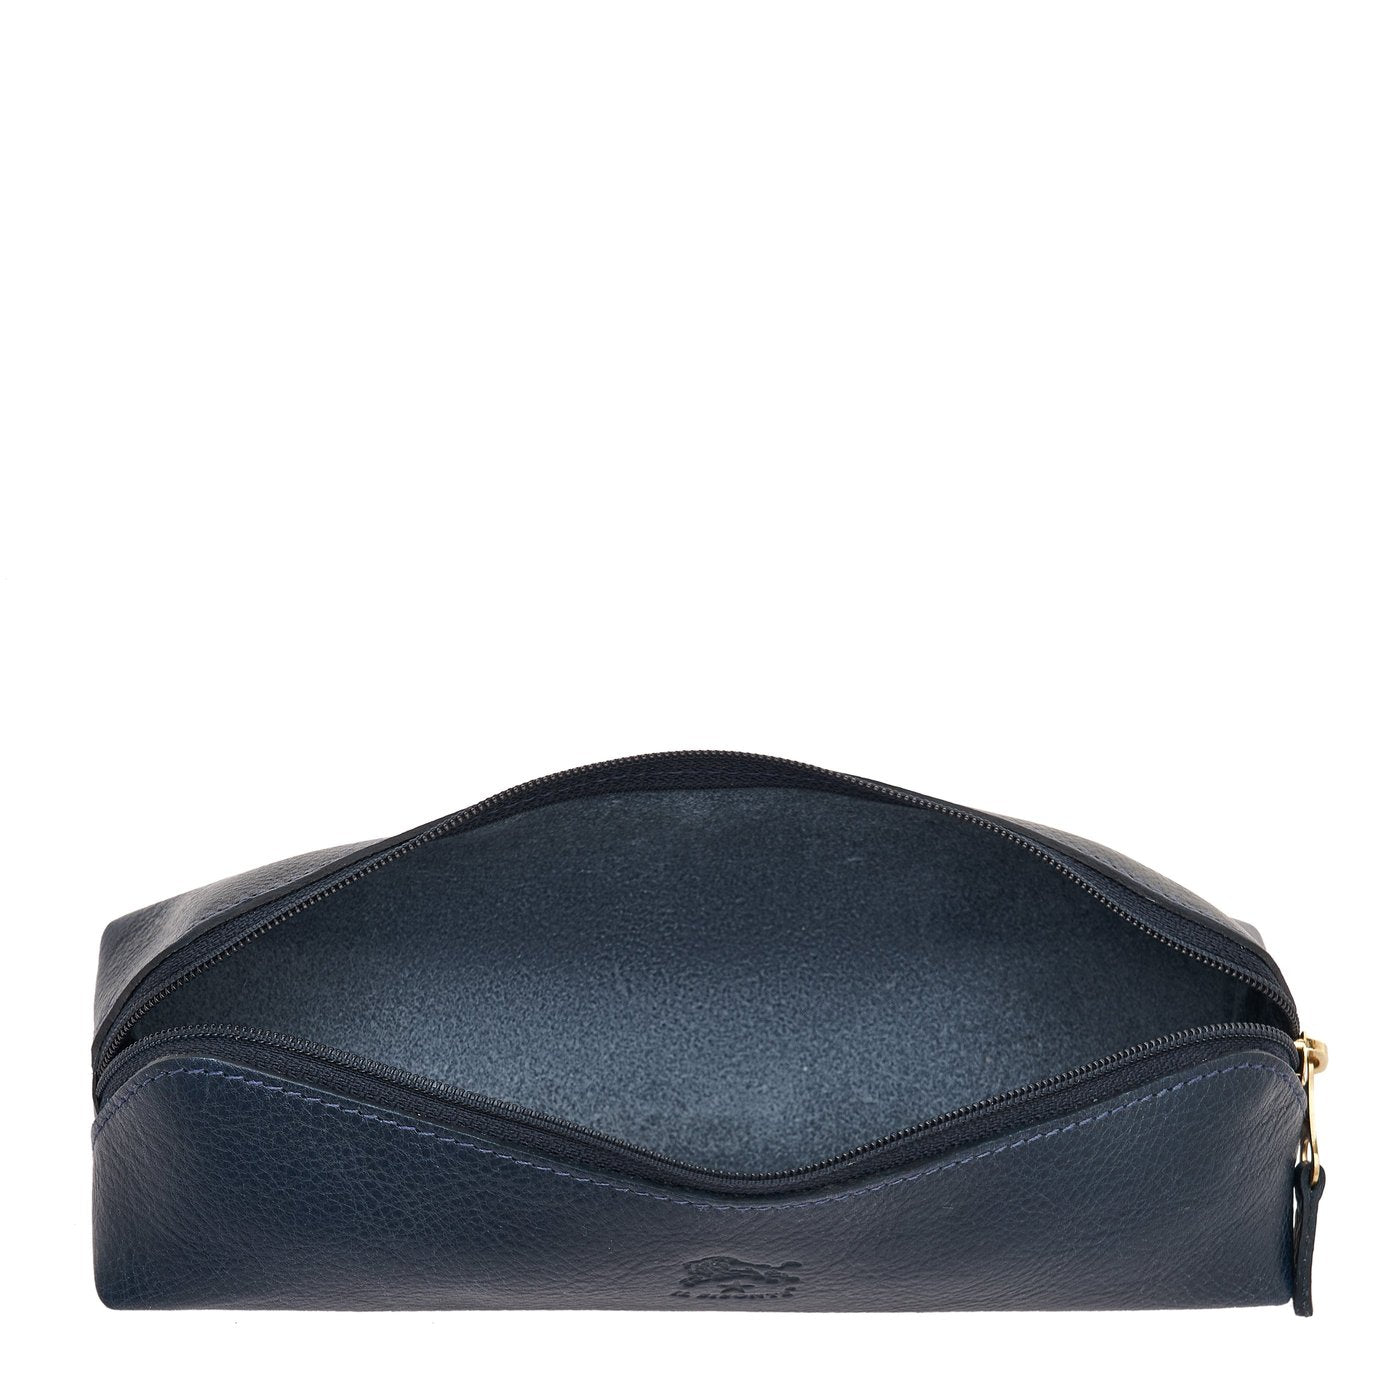 Women's case in calf leather color blue